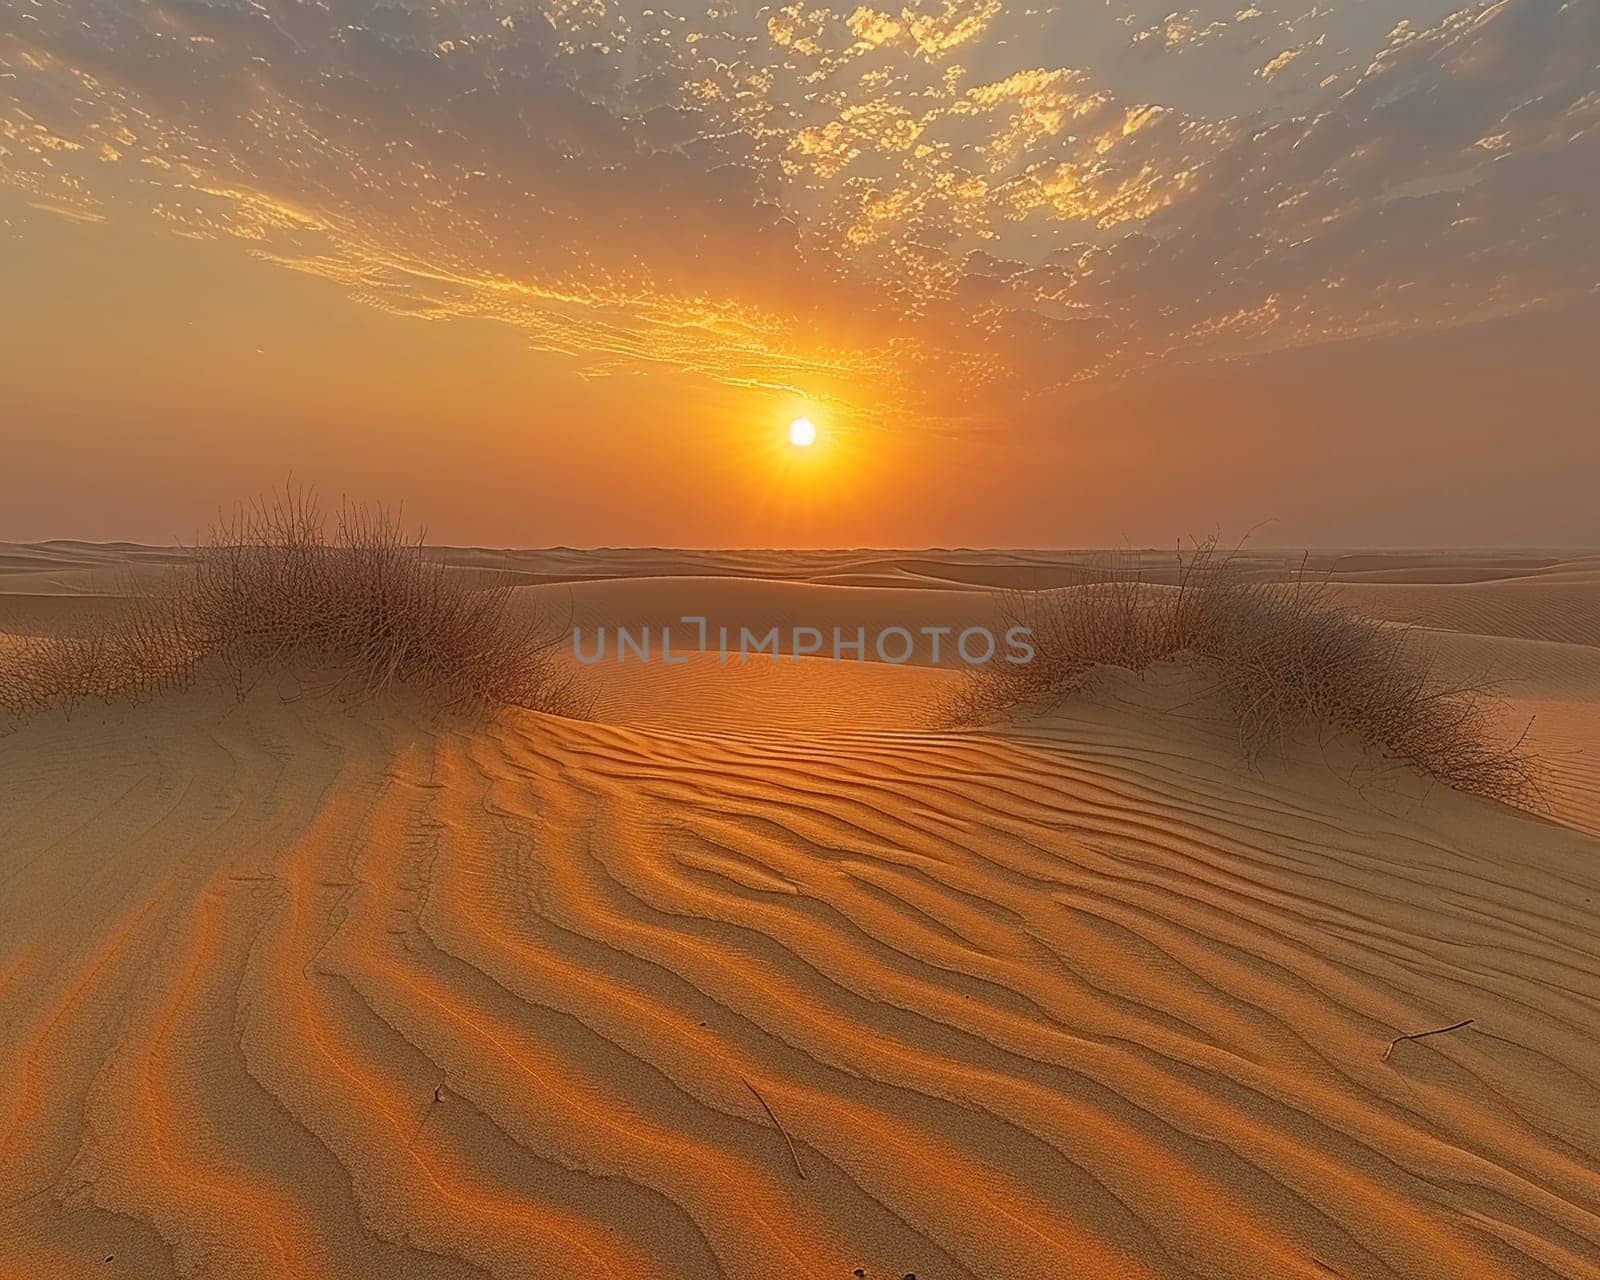 Patterns in the sand dunes under a setting sun by Benzoix